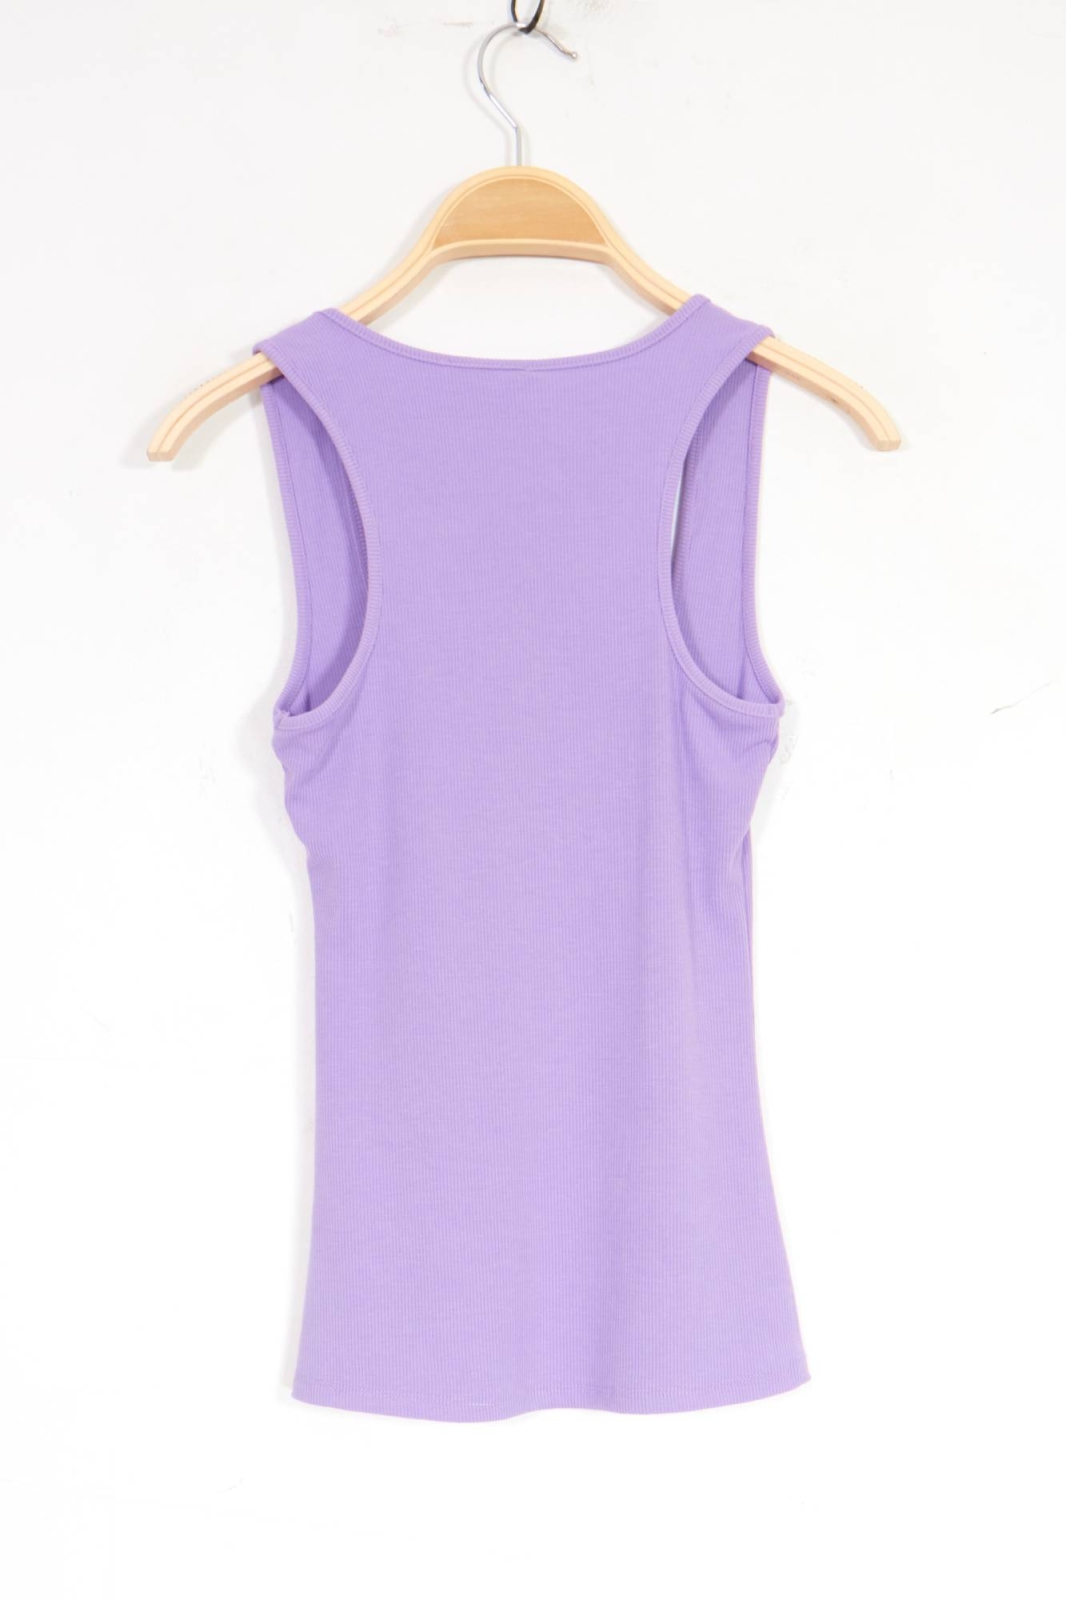 Racer Back Top - Lilac